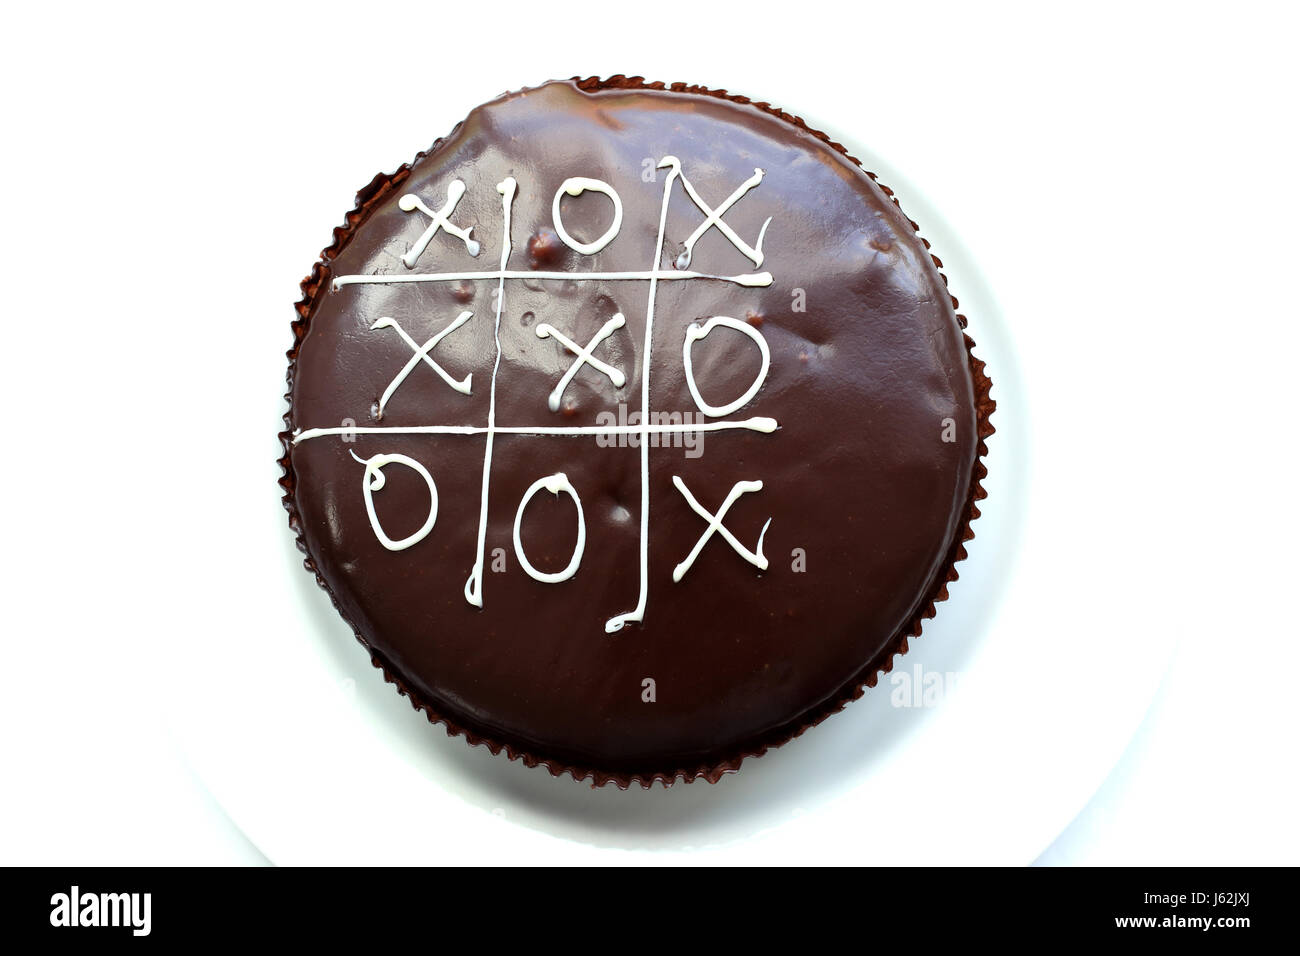 Noughts and crosses on mud cake isolated against white background Stock Photo